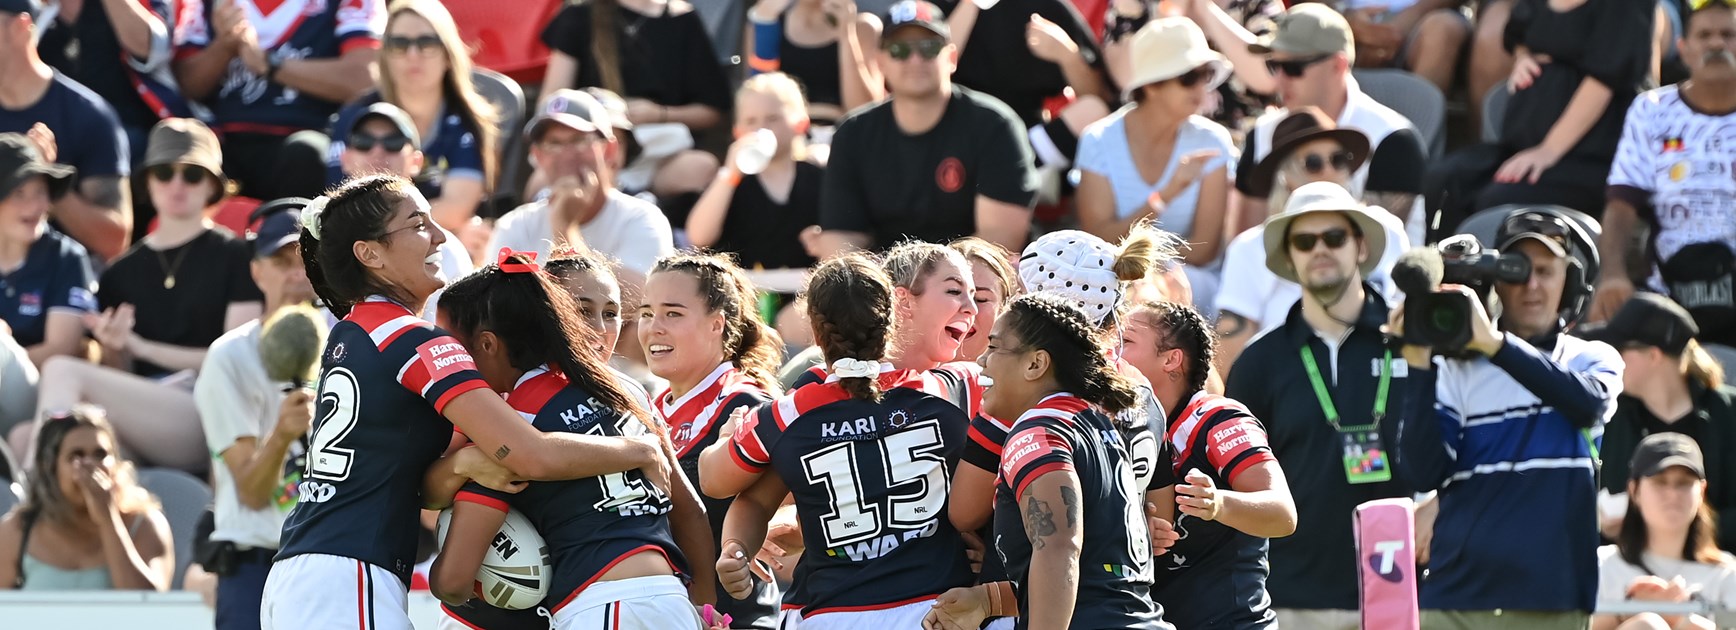 Roosters Rise in Redcliffe to Claim 2021 NRLW Premiership